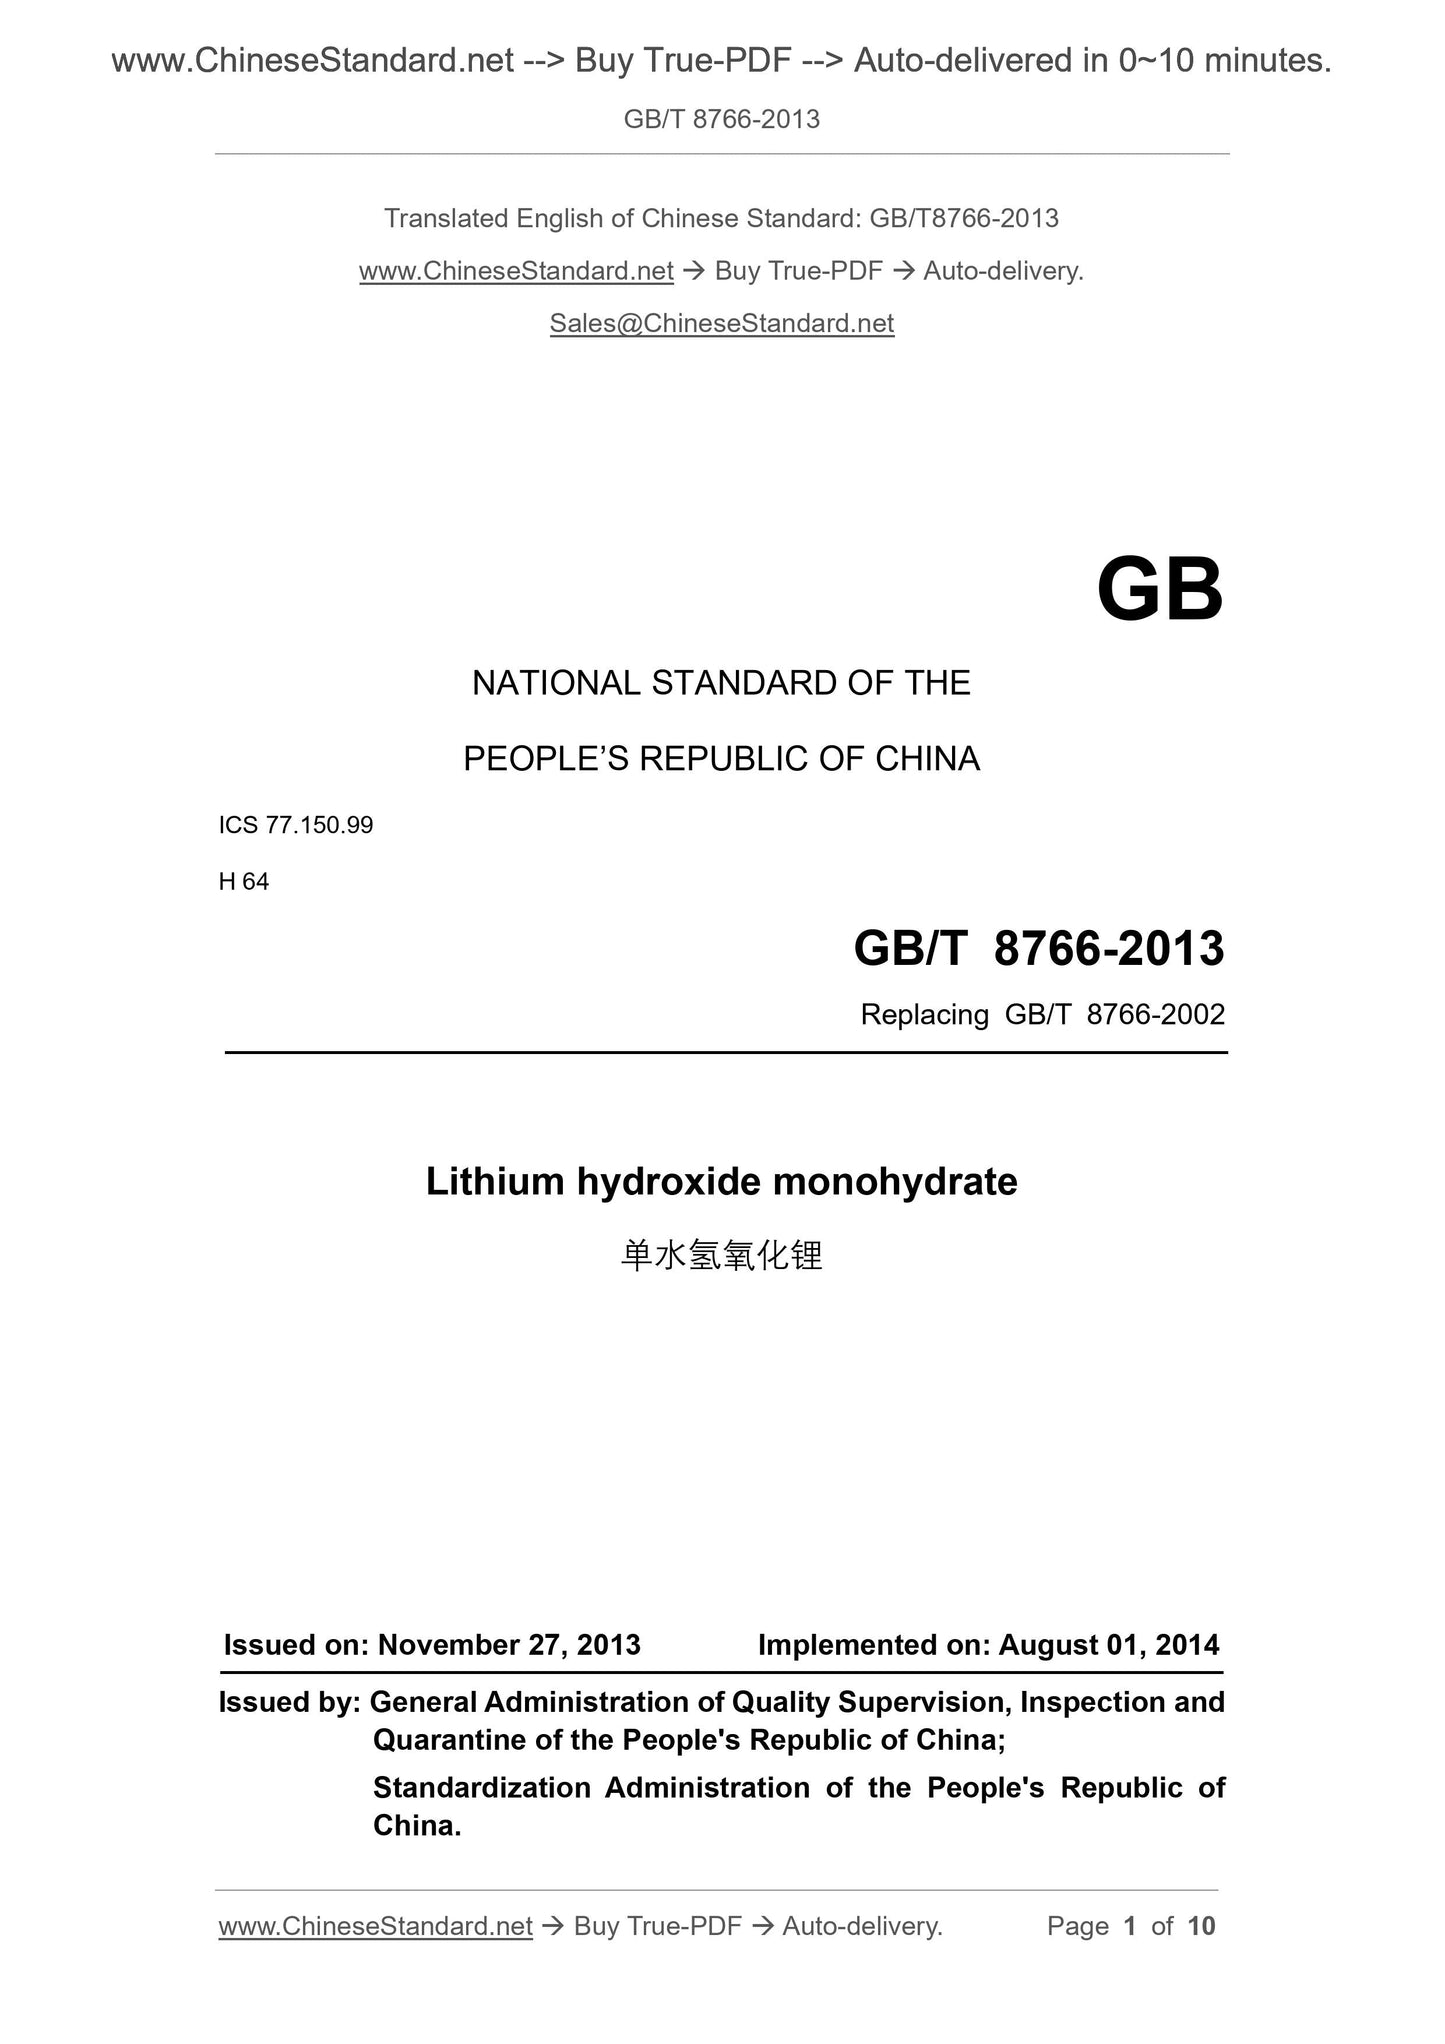 GB/T 8766-2013 Page 1